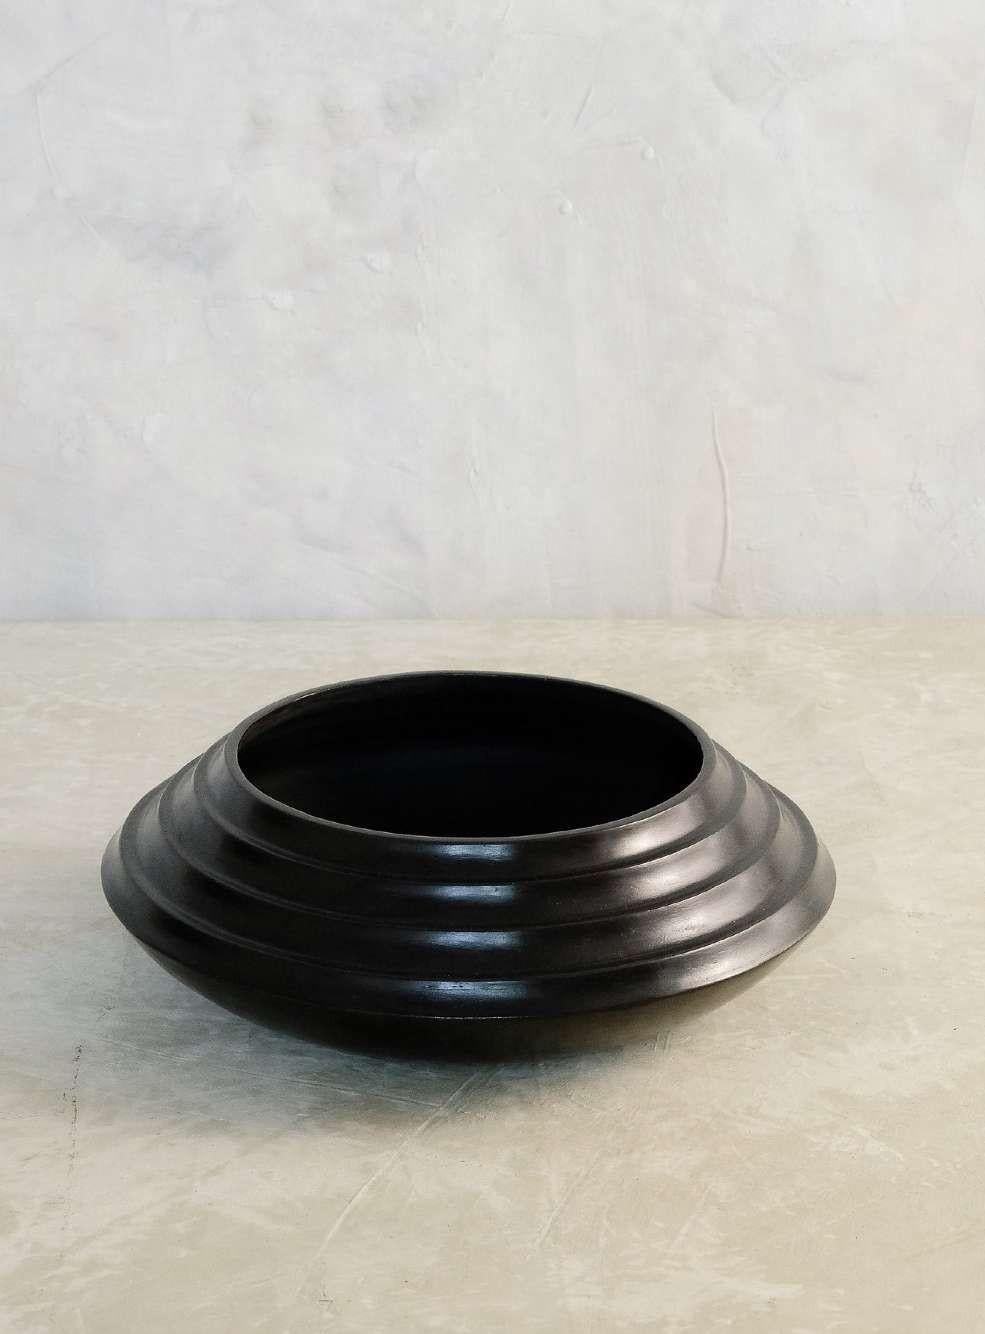 Pair of cascabel bowl by Onora
Dimensions: D 30 x H 10 cm
Materials: Clay

This collection reinterprets one of the oldest structural techniques in pottery, coiling, the vessels made with this technique are made from coils of clay positioned in